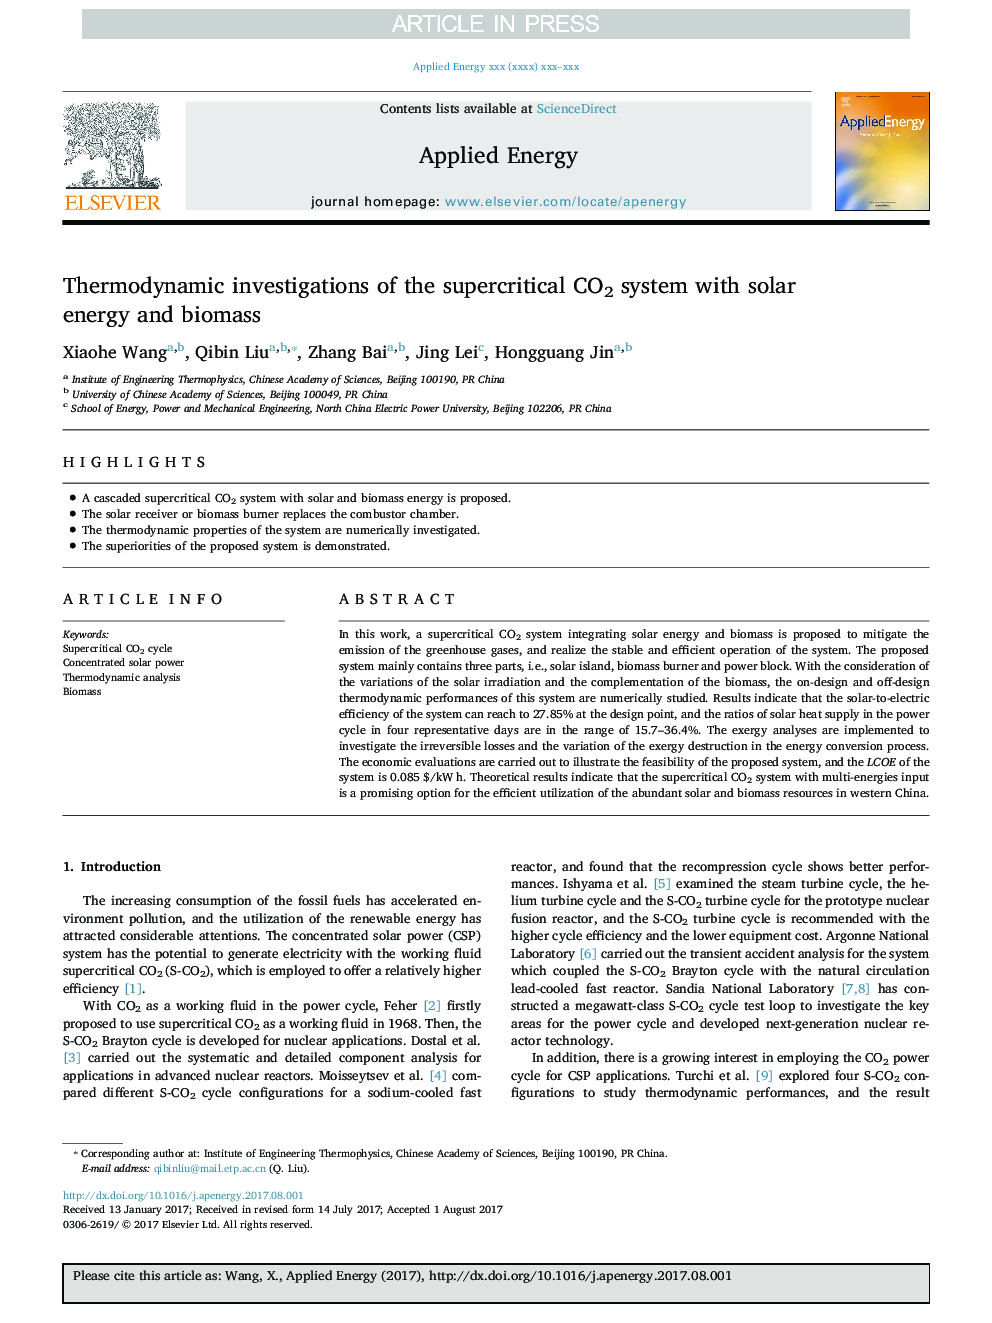 Thermodynamic investigations of the supercritical CO2 system with solar energy and biomass